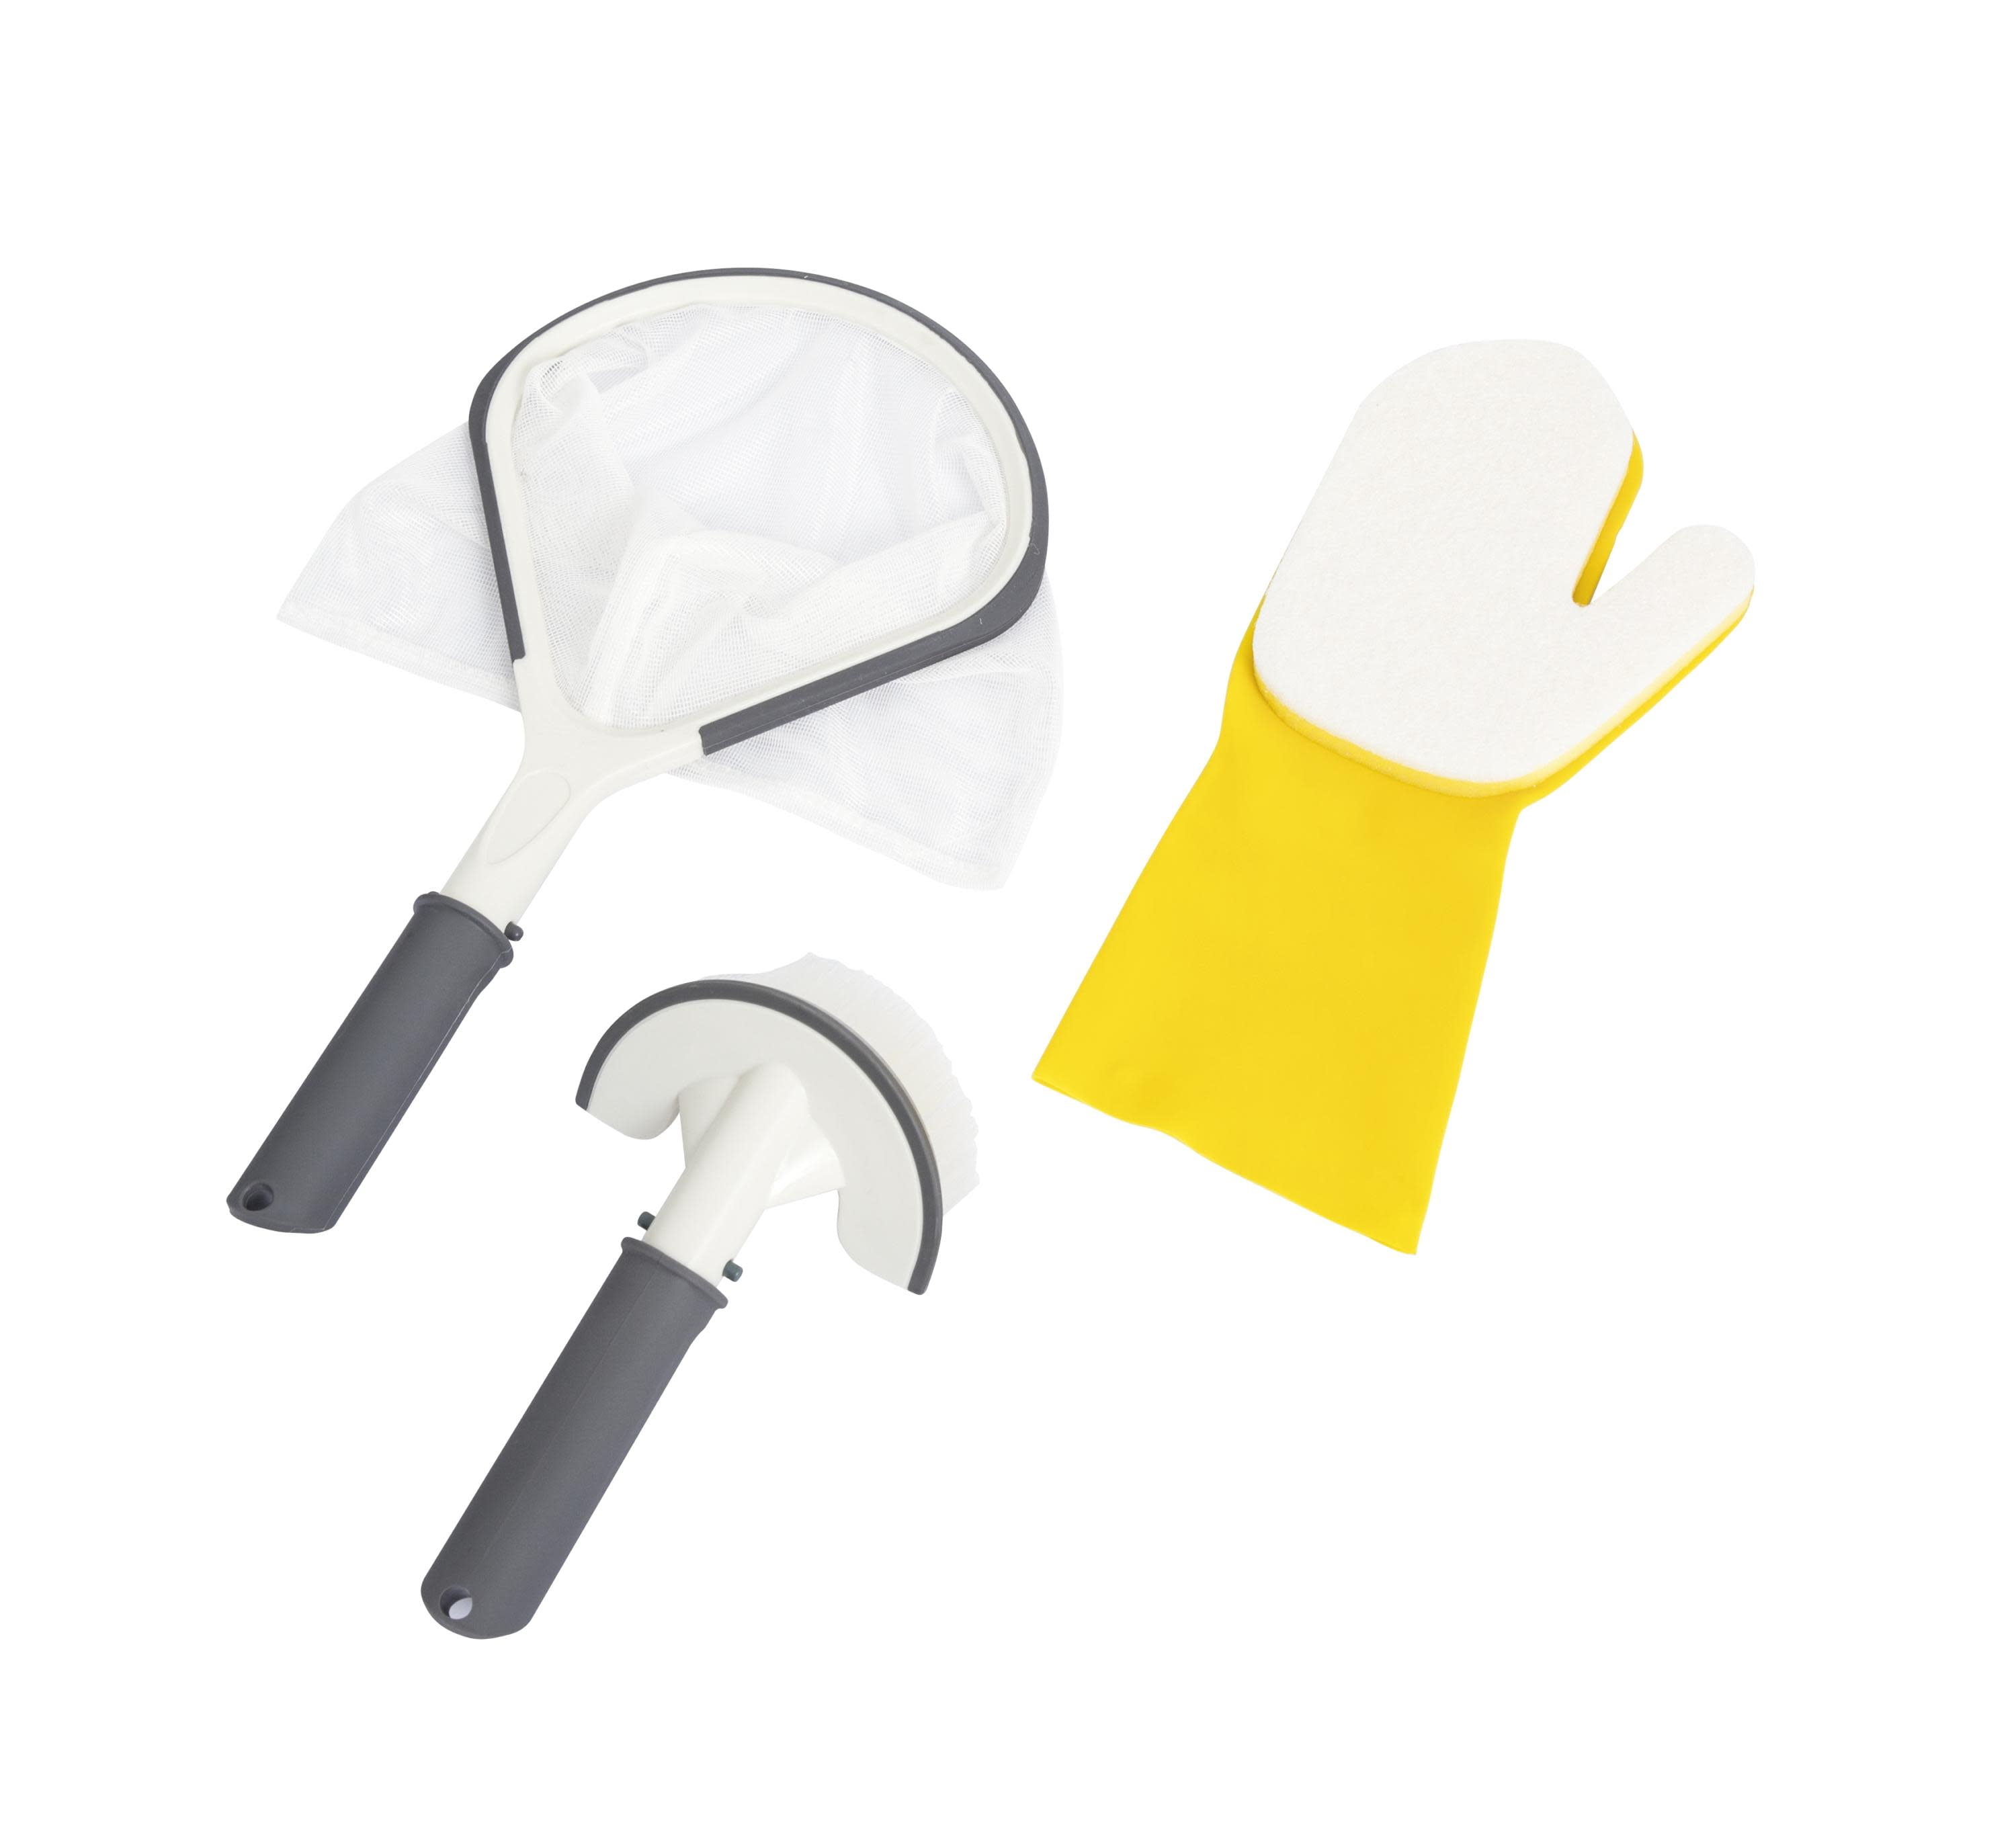 3-Piece SaluSpa All in One Spa Cleaning Tool Set  $7.98 + Free S&H w/ Walmart+ or $35+